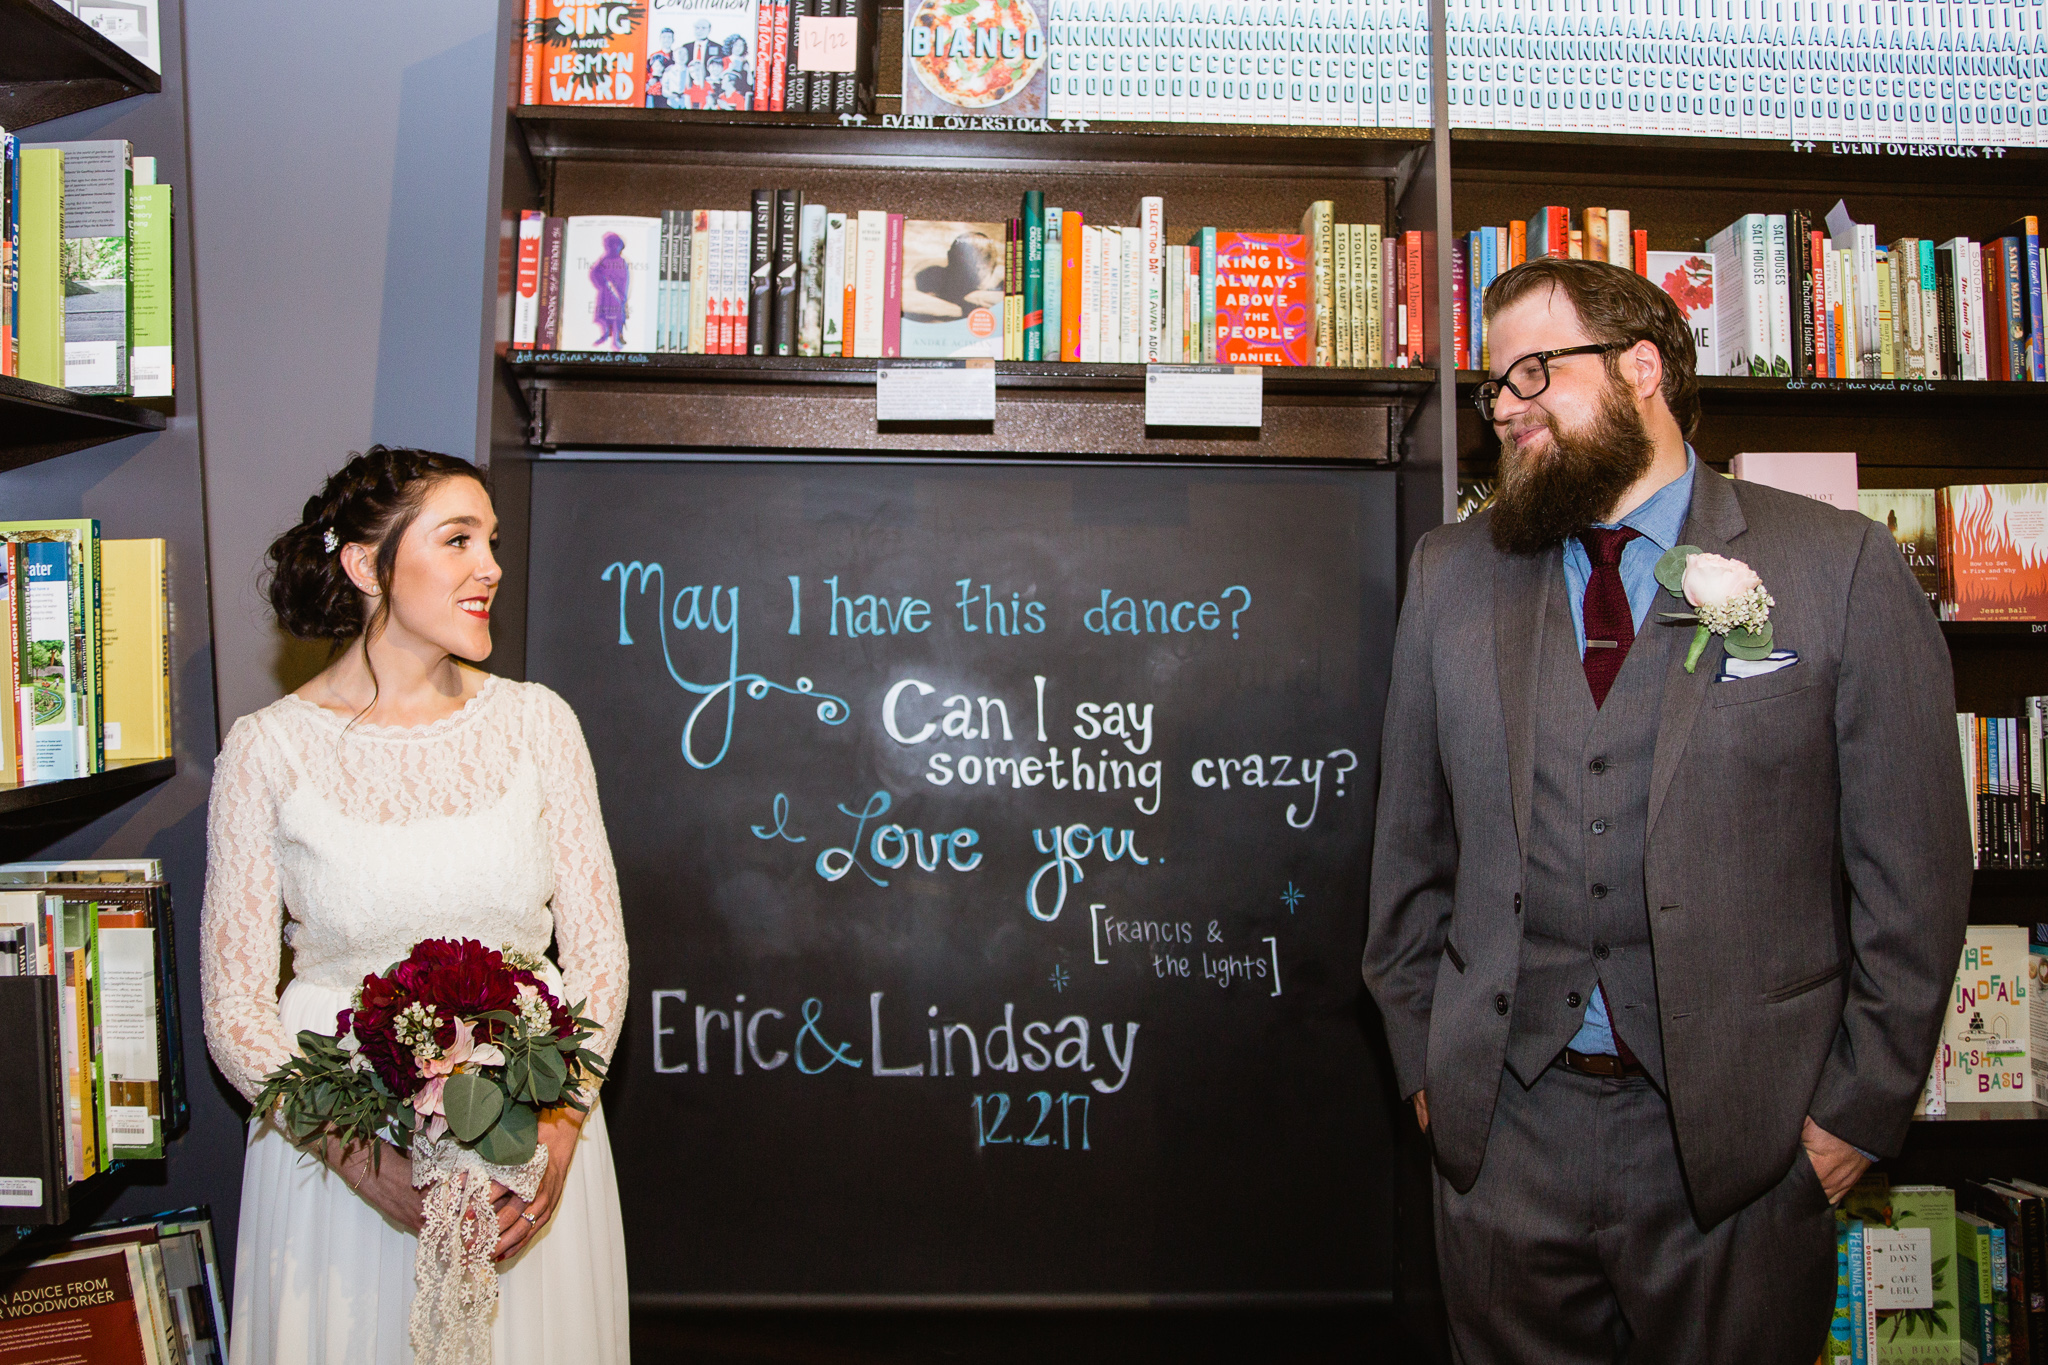 Vintage inspired bride and groom with chalkboard quote from Francis & The Lights in Changing Hands bookstore at their book themed wedding in downtown Phoenix.